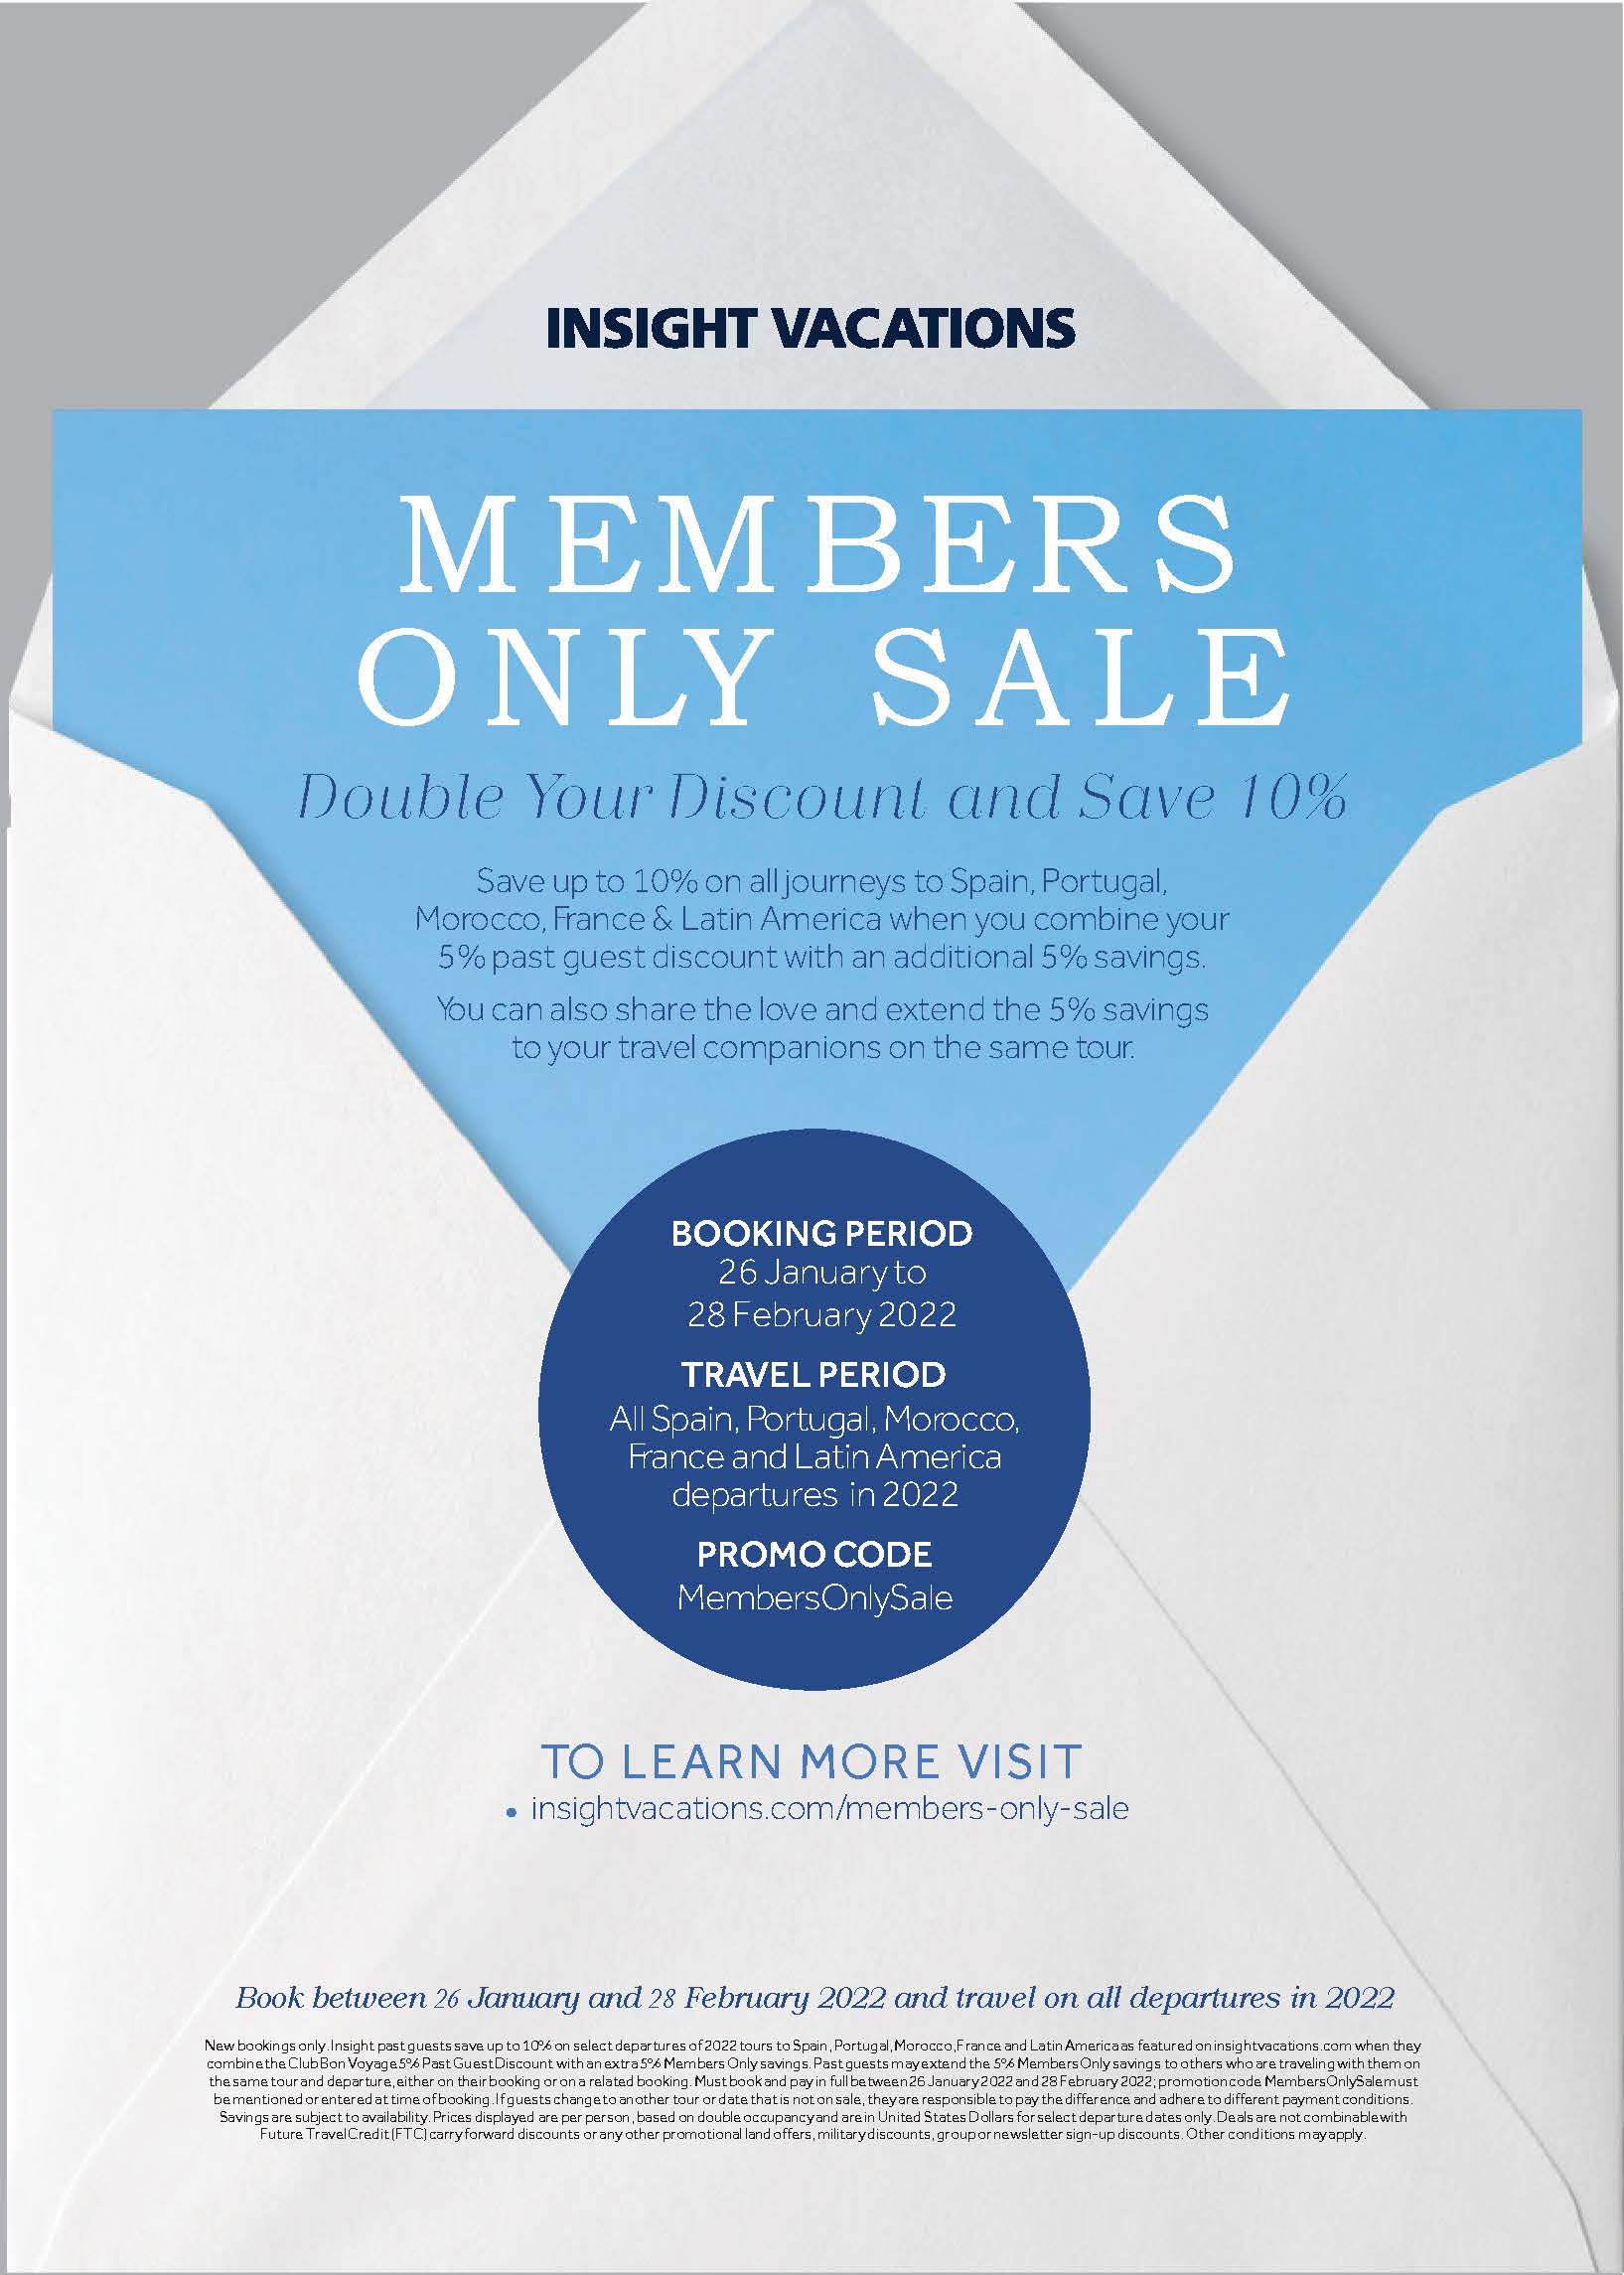 Insight Vacations Members Only Sale INSIGHTS VACATION MEMBERS ONLY SALE Page 1